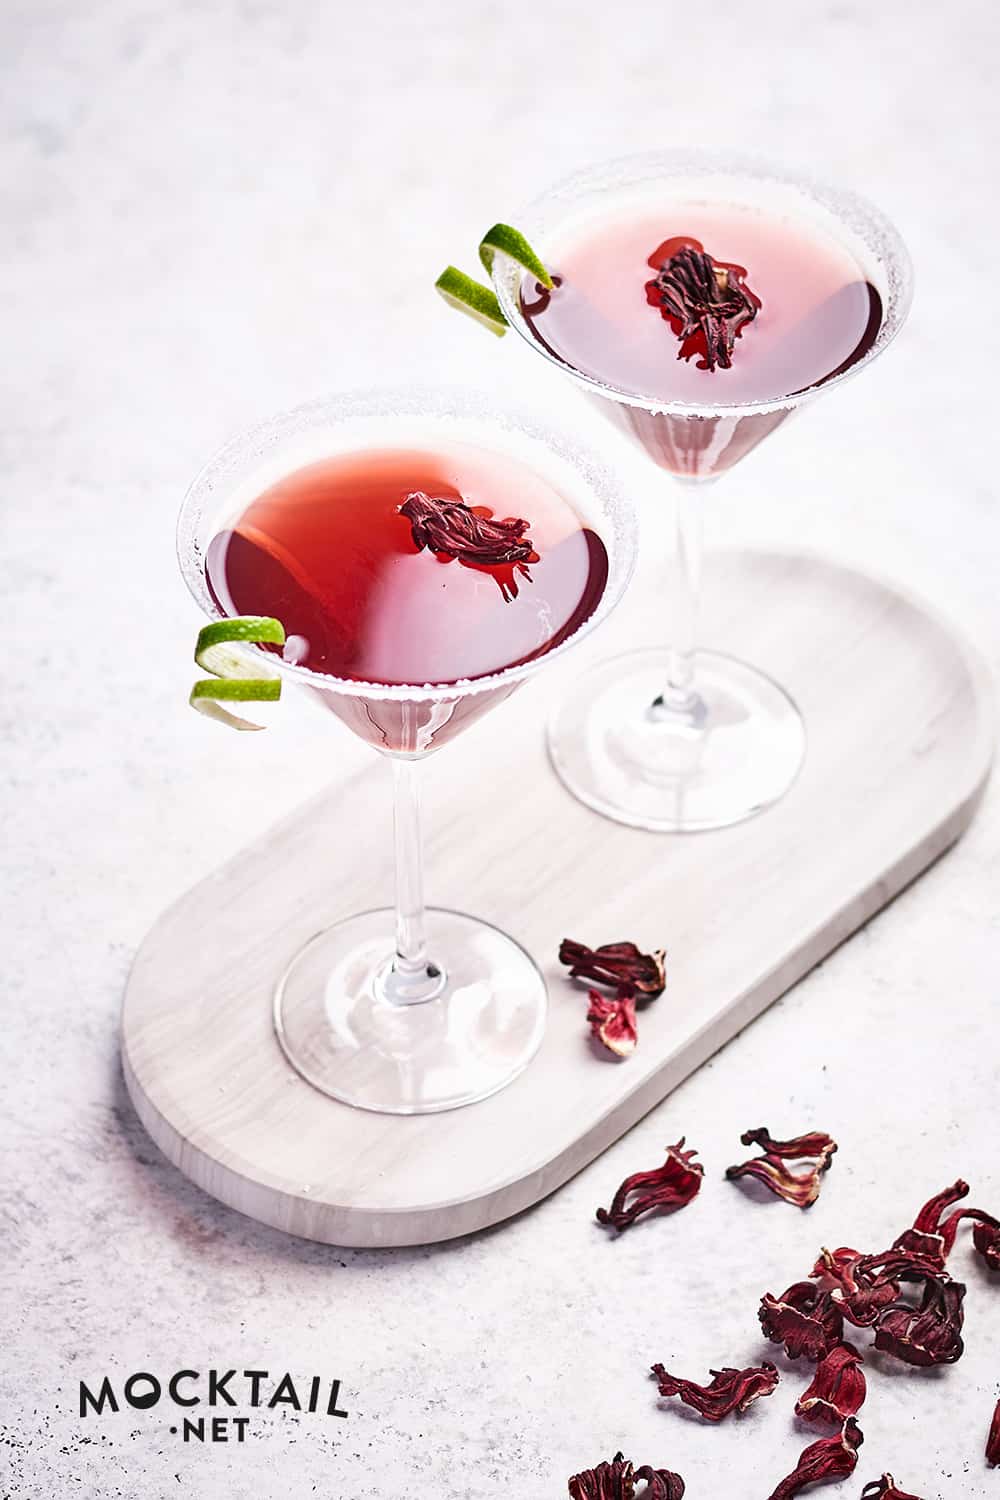 How to Make a Non Alcoholic Hibiscus Cocktail